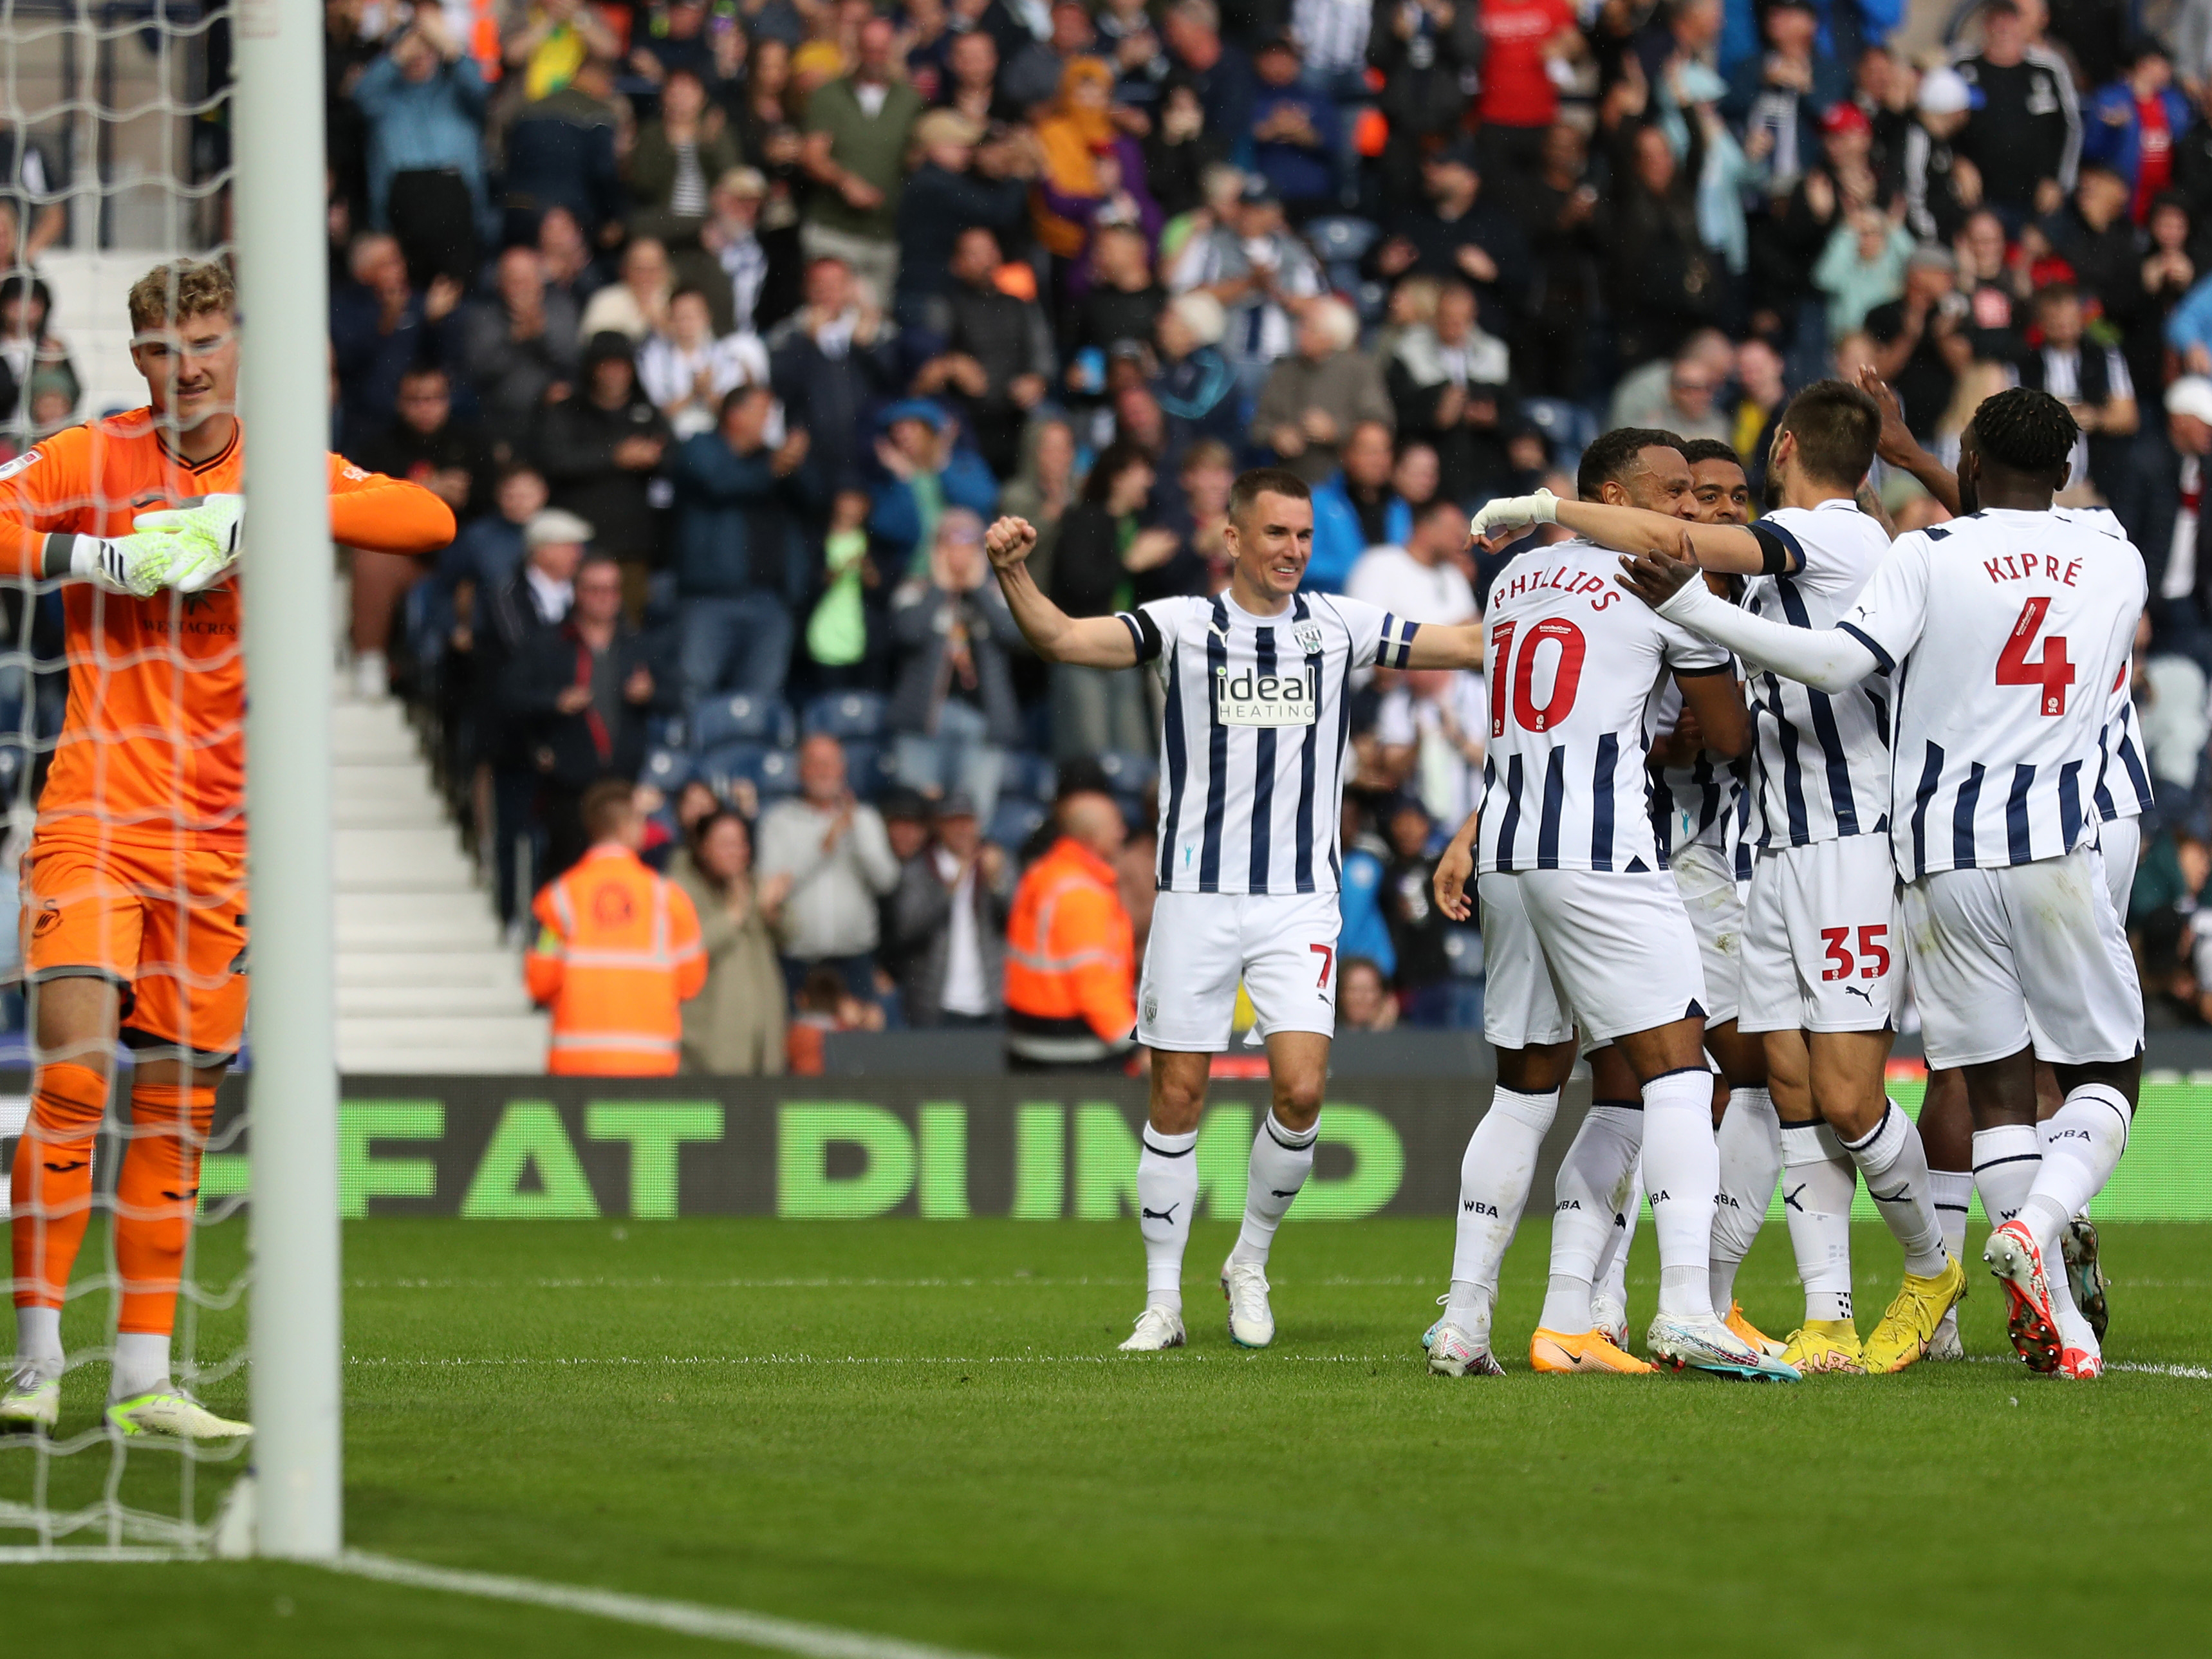 Albion's players celebrate Swift's goal against Swansea